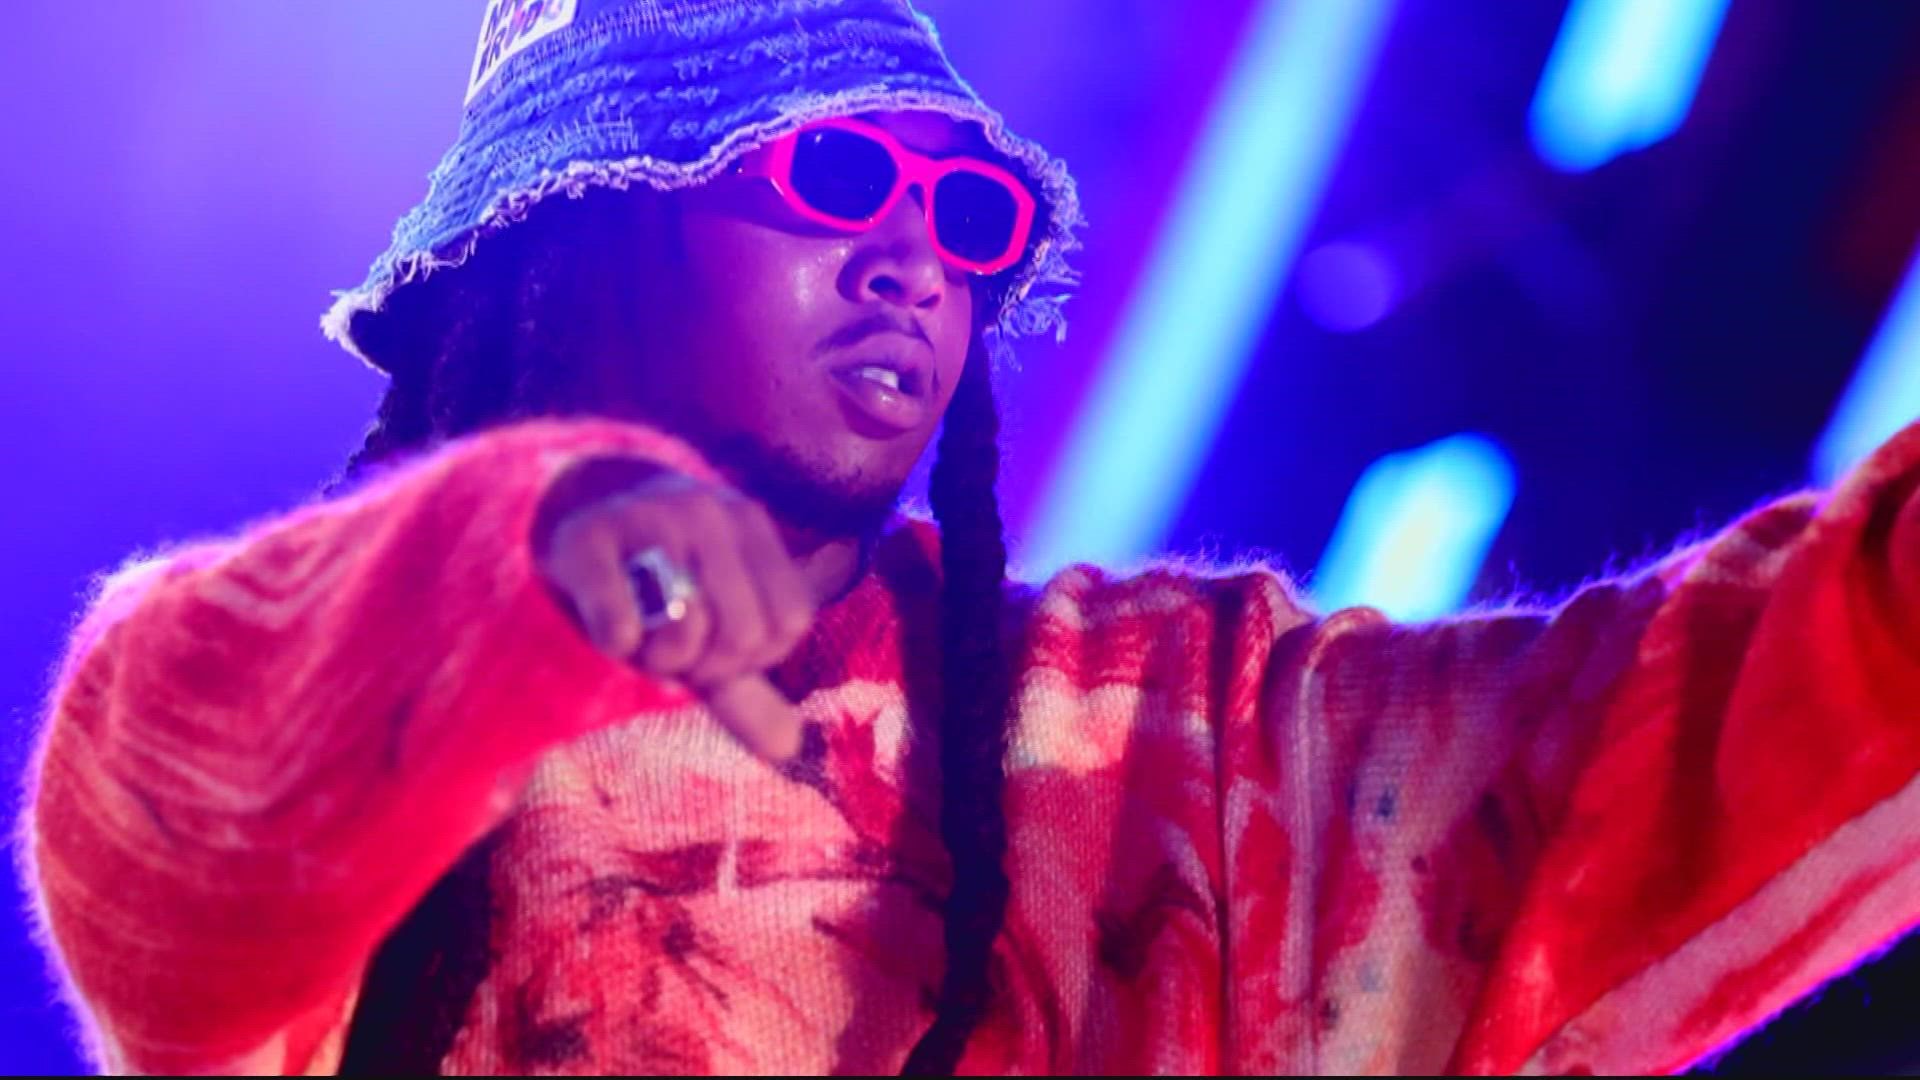 A 33-year-old man was arrested on a murder charge in the shooting of rapper Takeoff, who police on Friday said was an “innocent bystander” when he was shot.